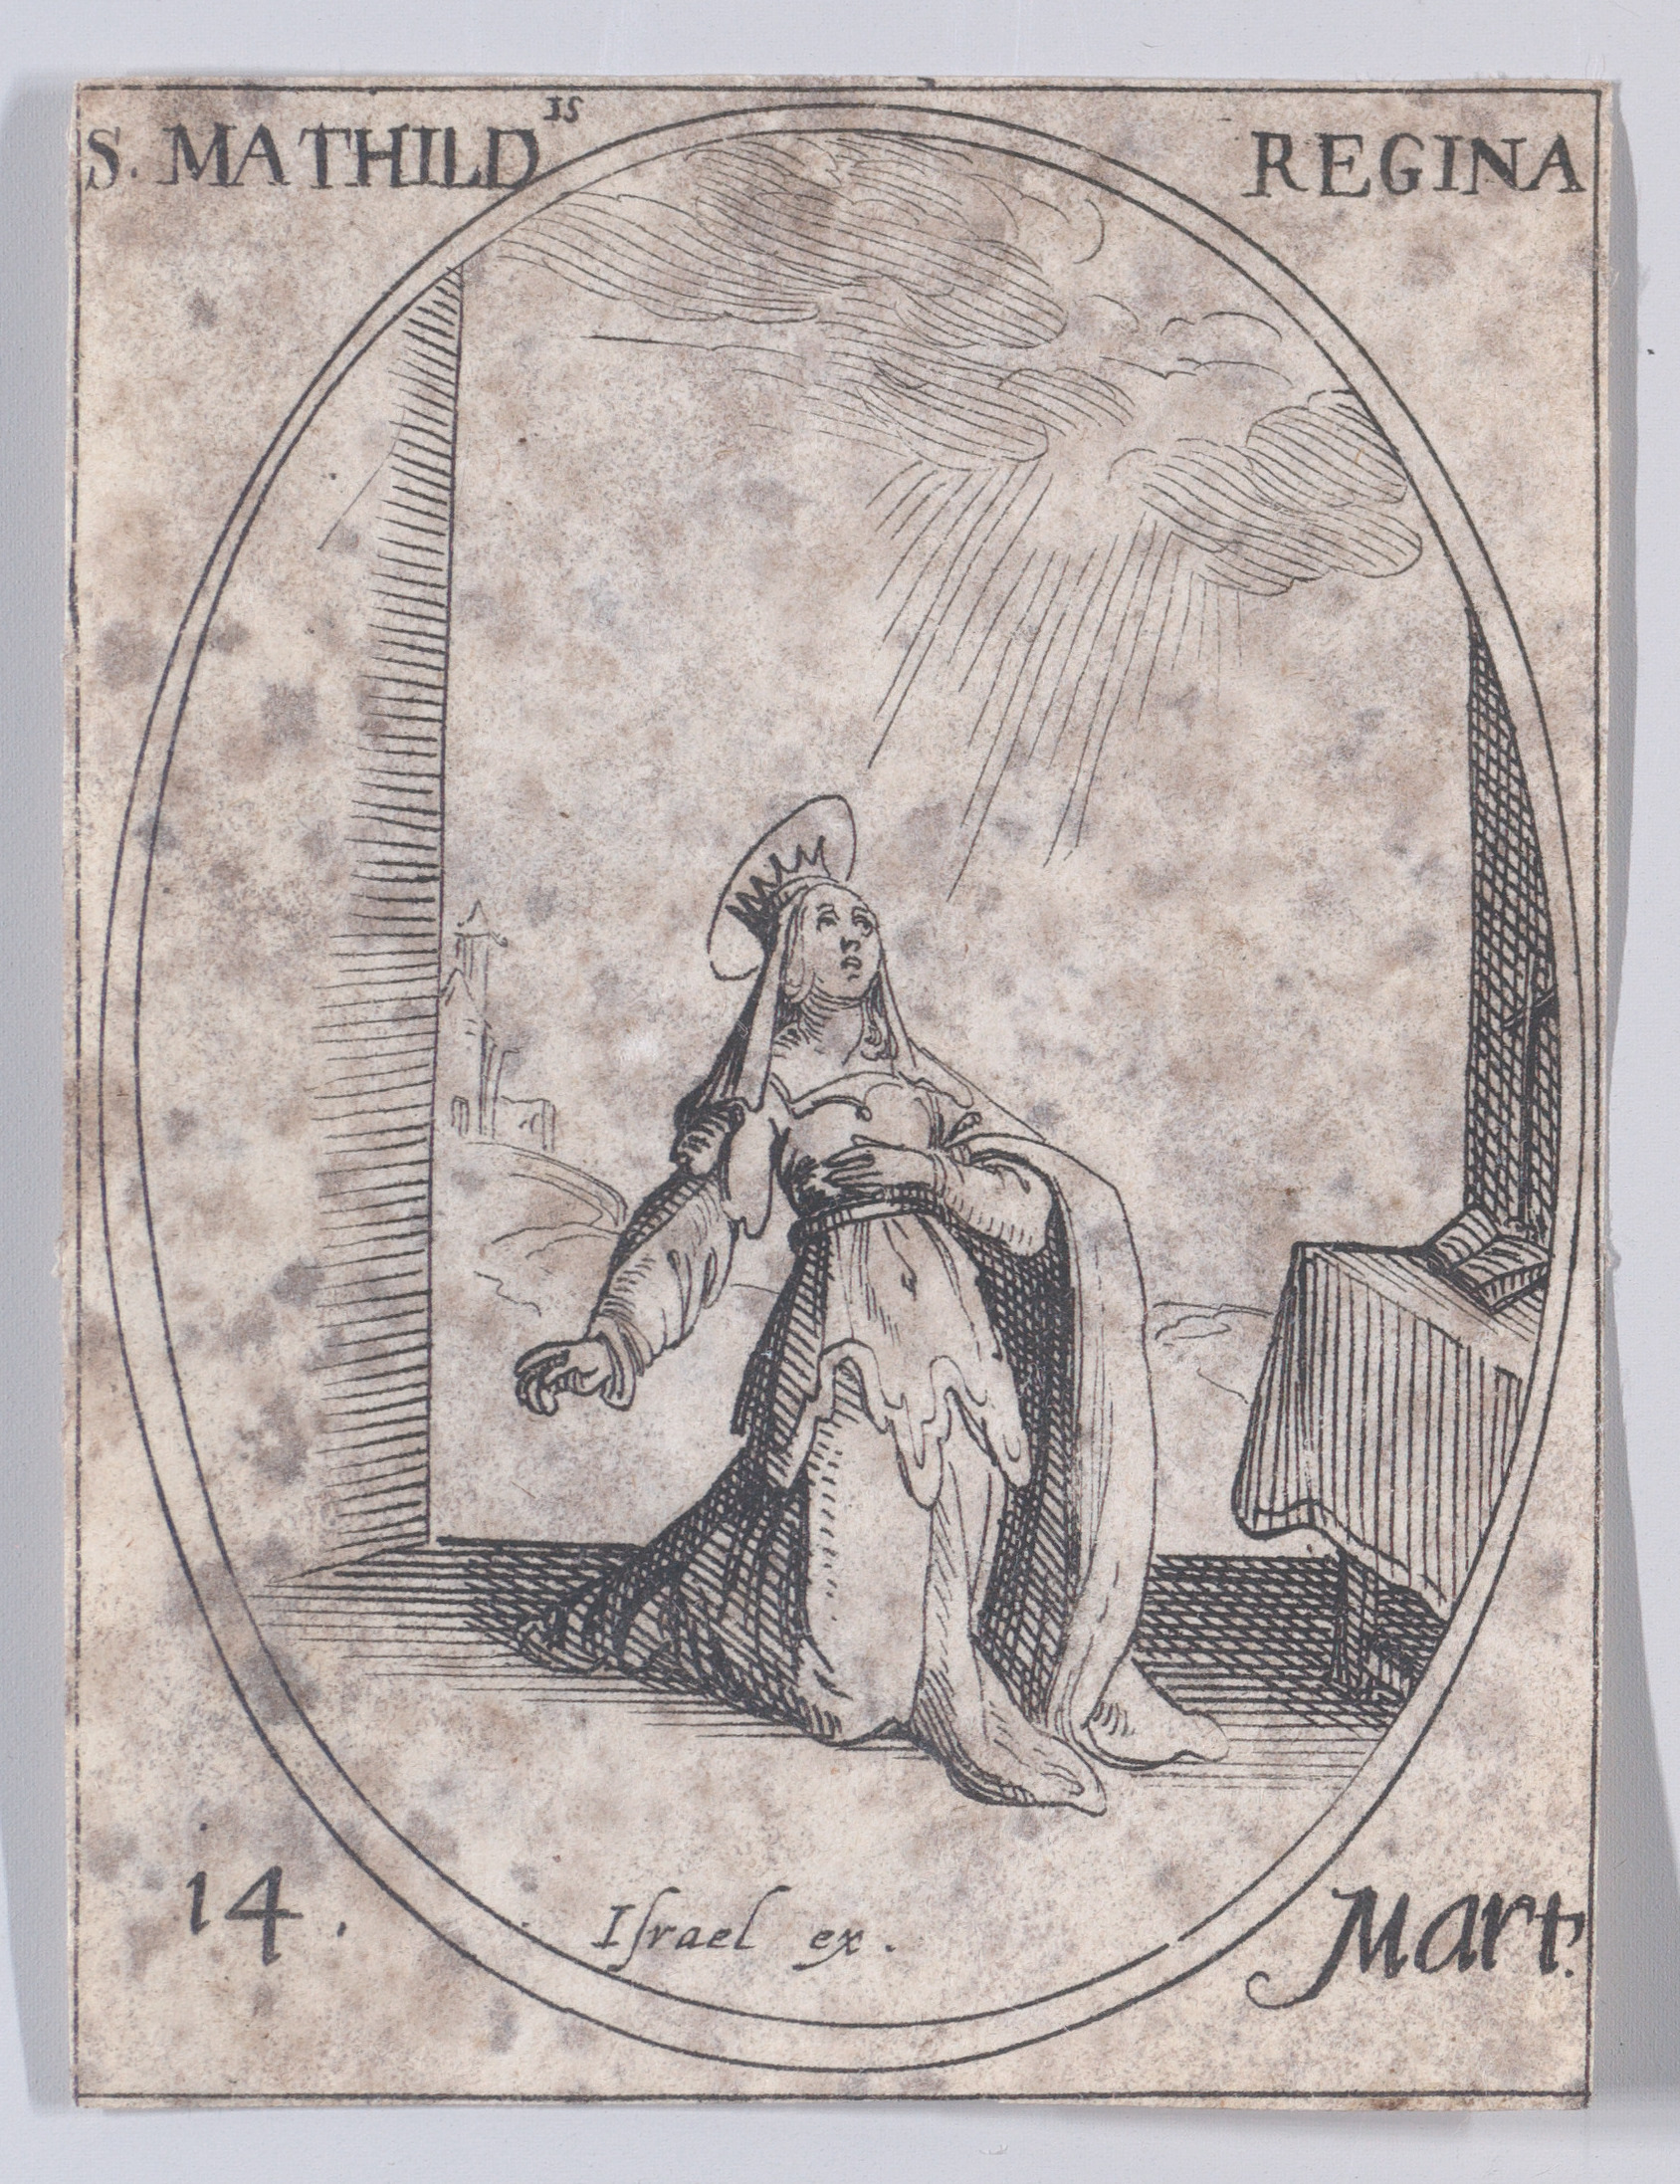 Ste. Mathilde, reine (St. Matilda, Queen), March 14th, from Les Images De Tous Les Saincts et Saintes de L'Année (Images of All of the Saints and Religious Events of the Year), Jacques Callot (French, Nancy 1592–1635 Nancy), Etching; second state of two (Lieure)